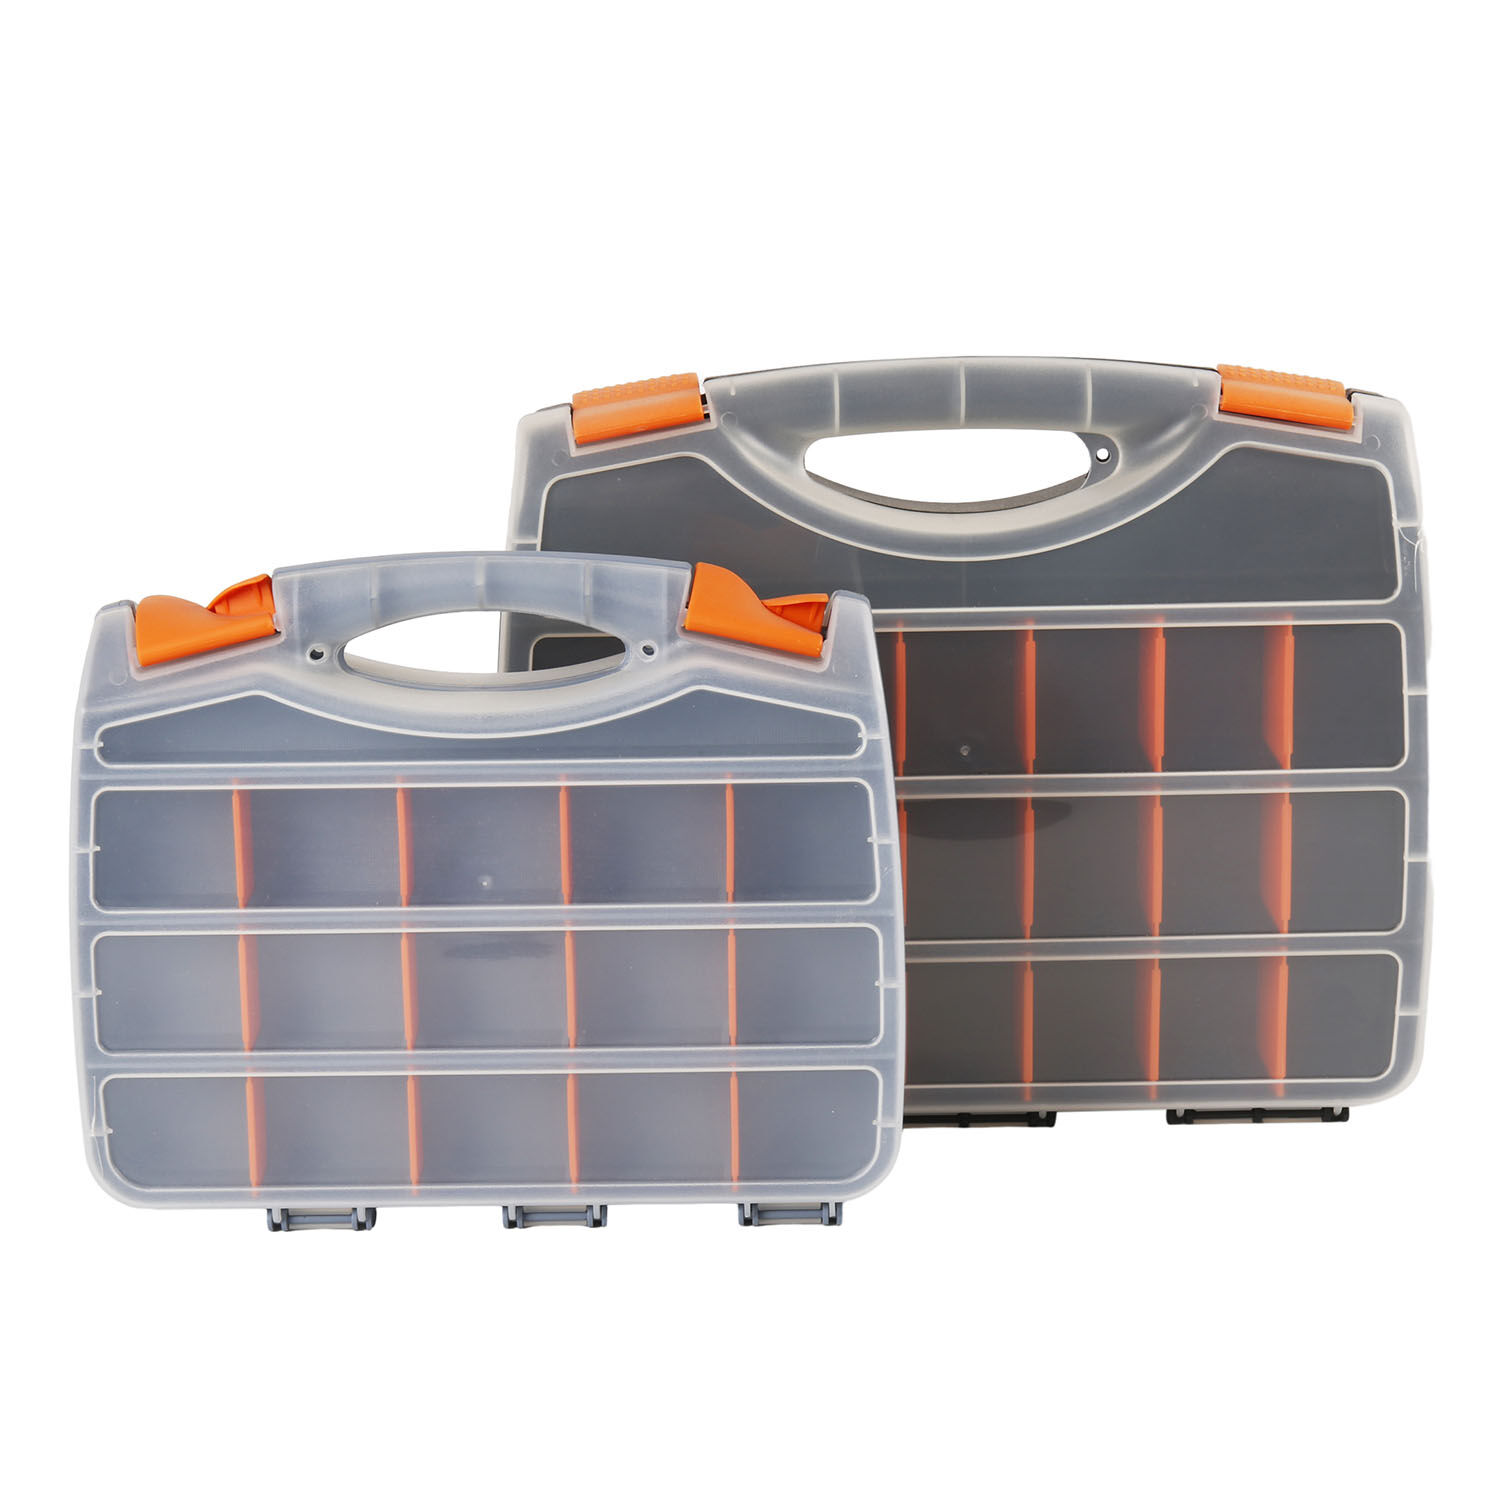 Bulk Buy China Wholesale Sl-d10/gd010 Pp Portable Plastic Tool Case $1.15  from Saferlife Products Co. Ltd